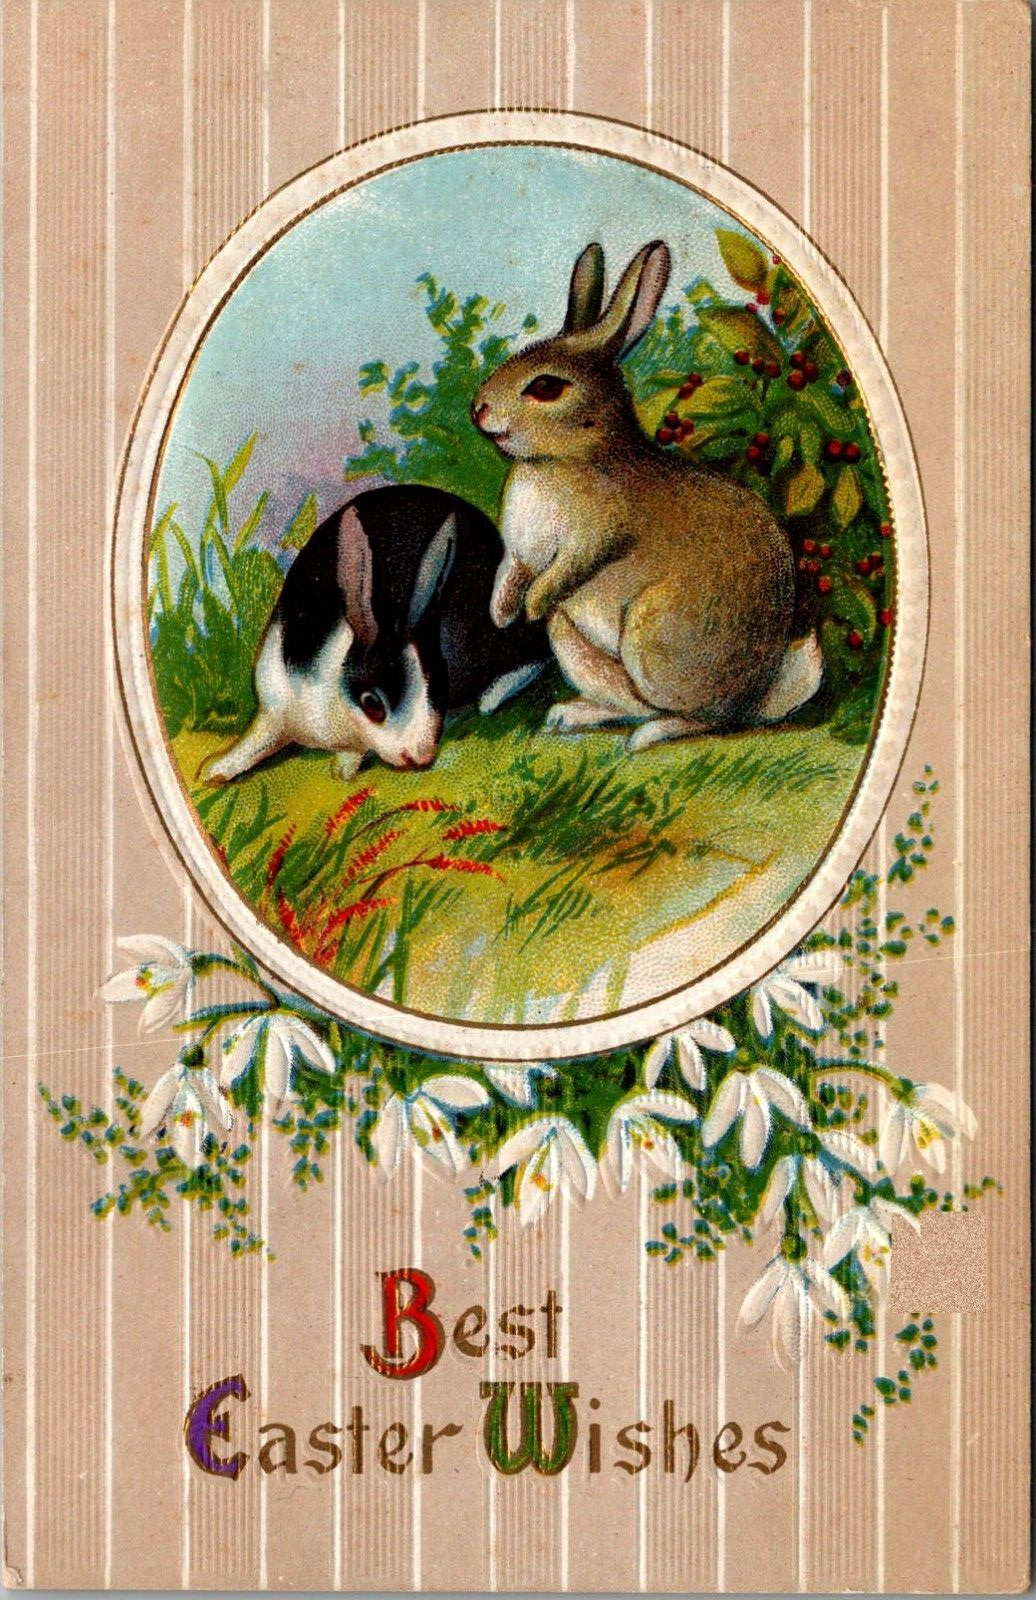 Best Easter Wishes Greetings Embossed Postcard  Bunny Rabbits in Field of Flower